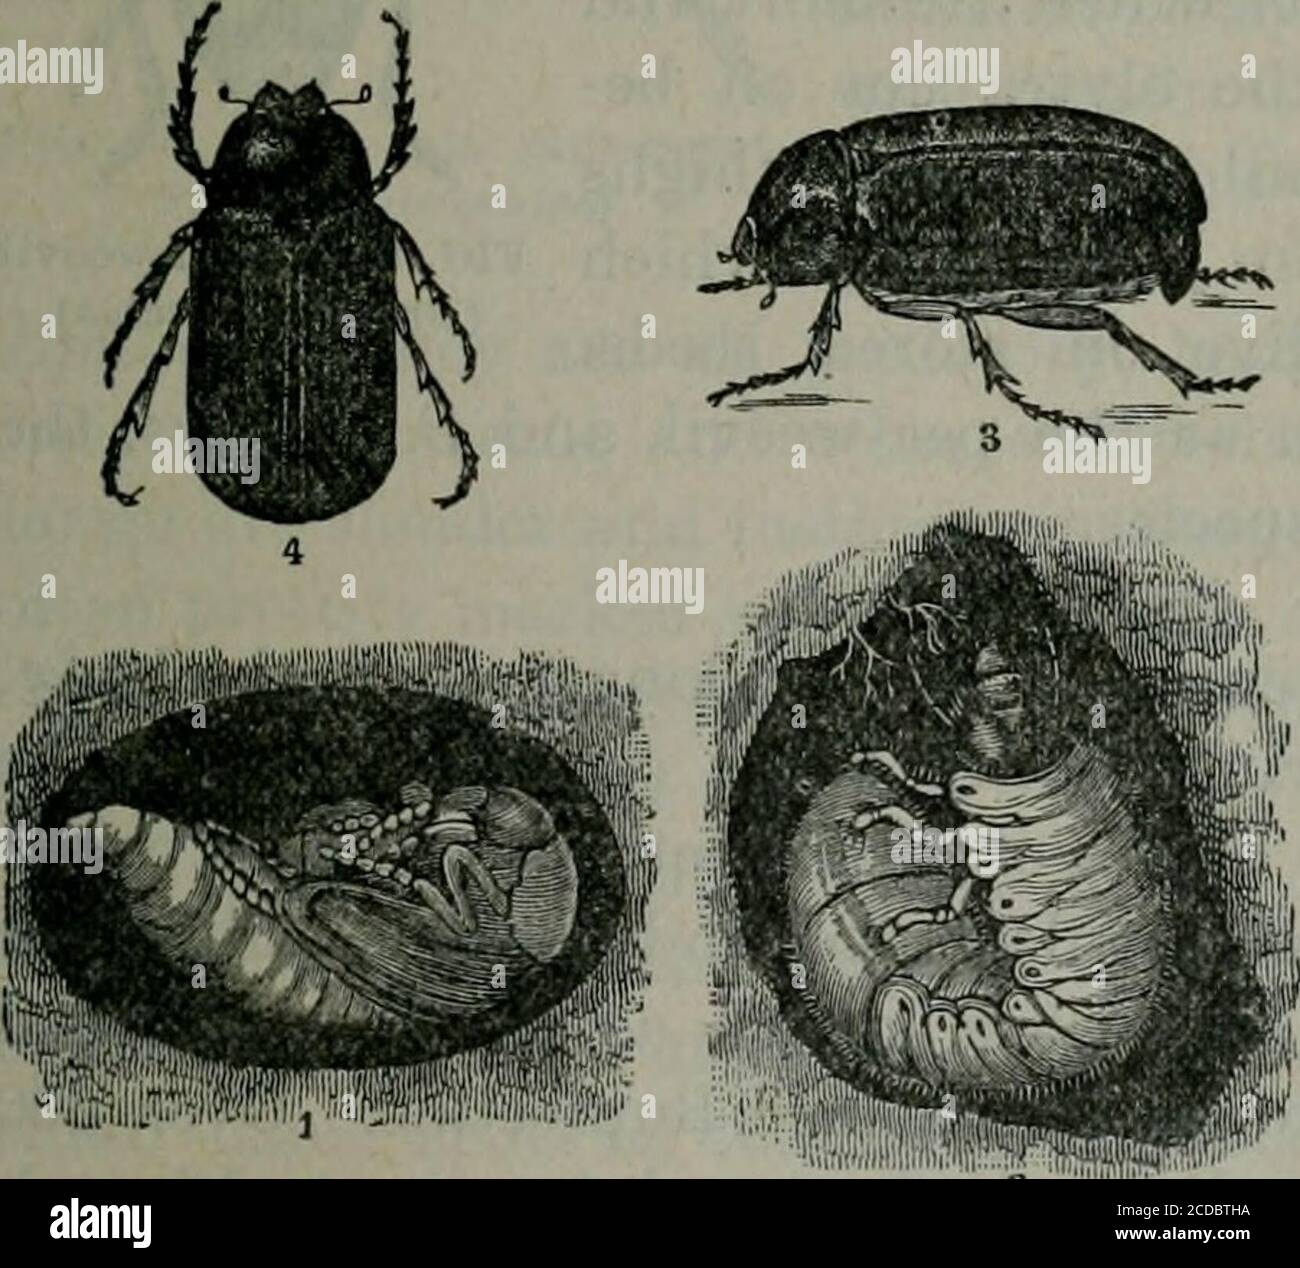 . Appendix to the Journals of the Senate and Assembly of the ... session of the Legislature of the State of California . Section TETRAMERA or PHYTOPHAGA. FIG. 93. Rose-chafer (Ma-crodactylossubspinosus). This section comprises those beetles which, apparently, have foursegmented tarsi, the fourth segment being so fixed with the third as to be indistinguishable. Thereare four families under thissection, and among them arevery many of our worst cropenemies. The family Chrysomelidaeis one of the largest of thebeetle families and probablycontains more injurious formsthan any other. They aregenerall Stock Photo